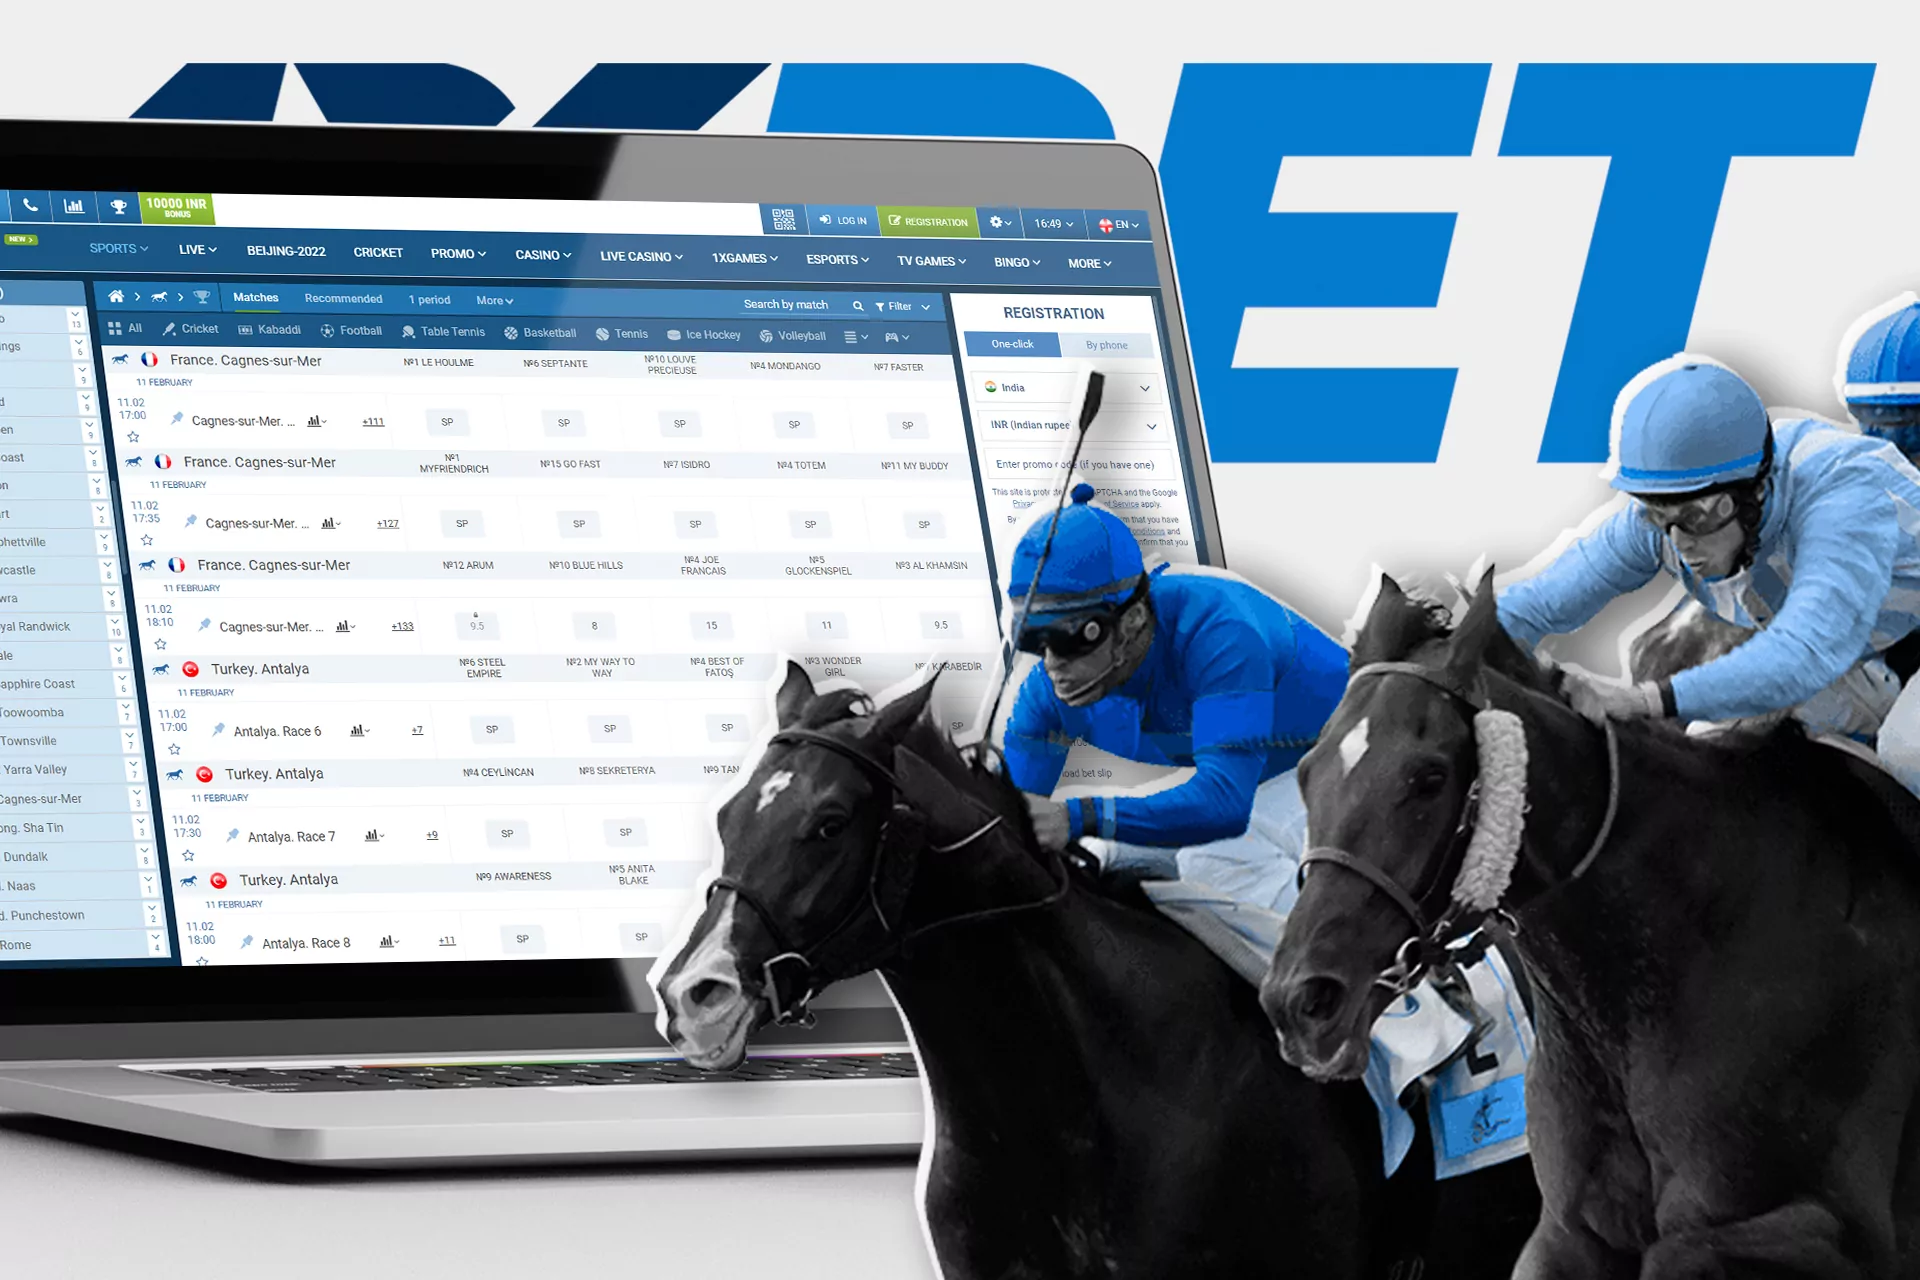 To place bets on horse racing events, you should be a registered member at 1xBet.